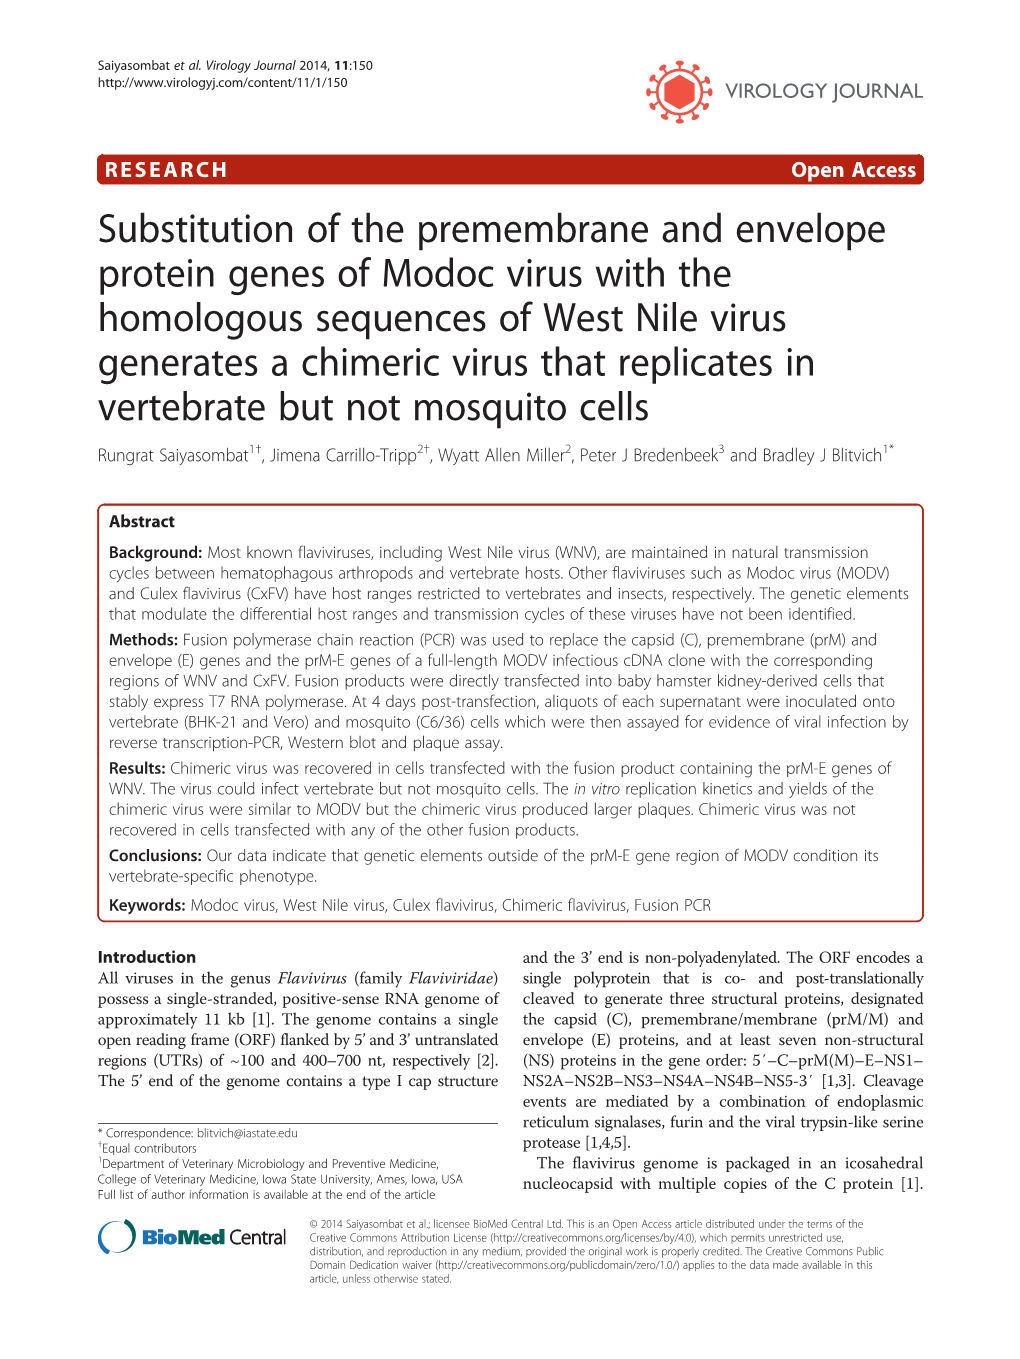 Substitution of the Premembrane and Envelope Protein